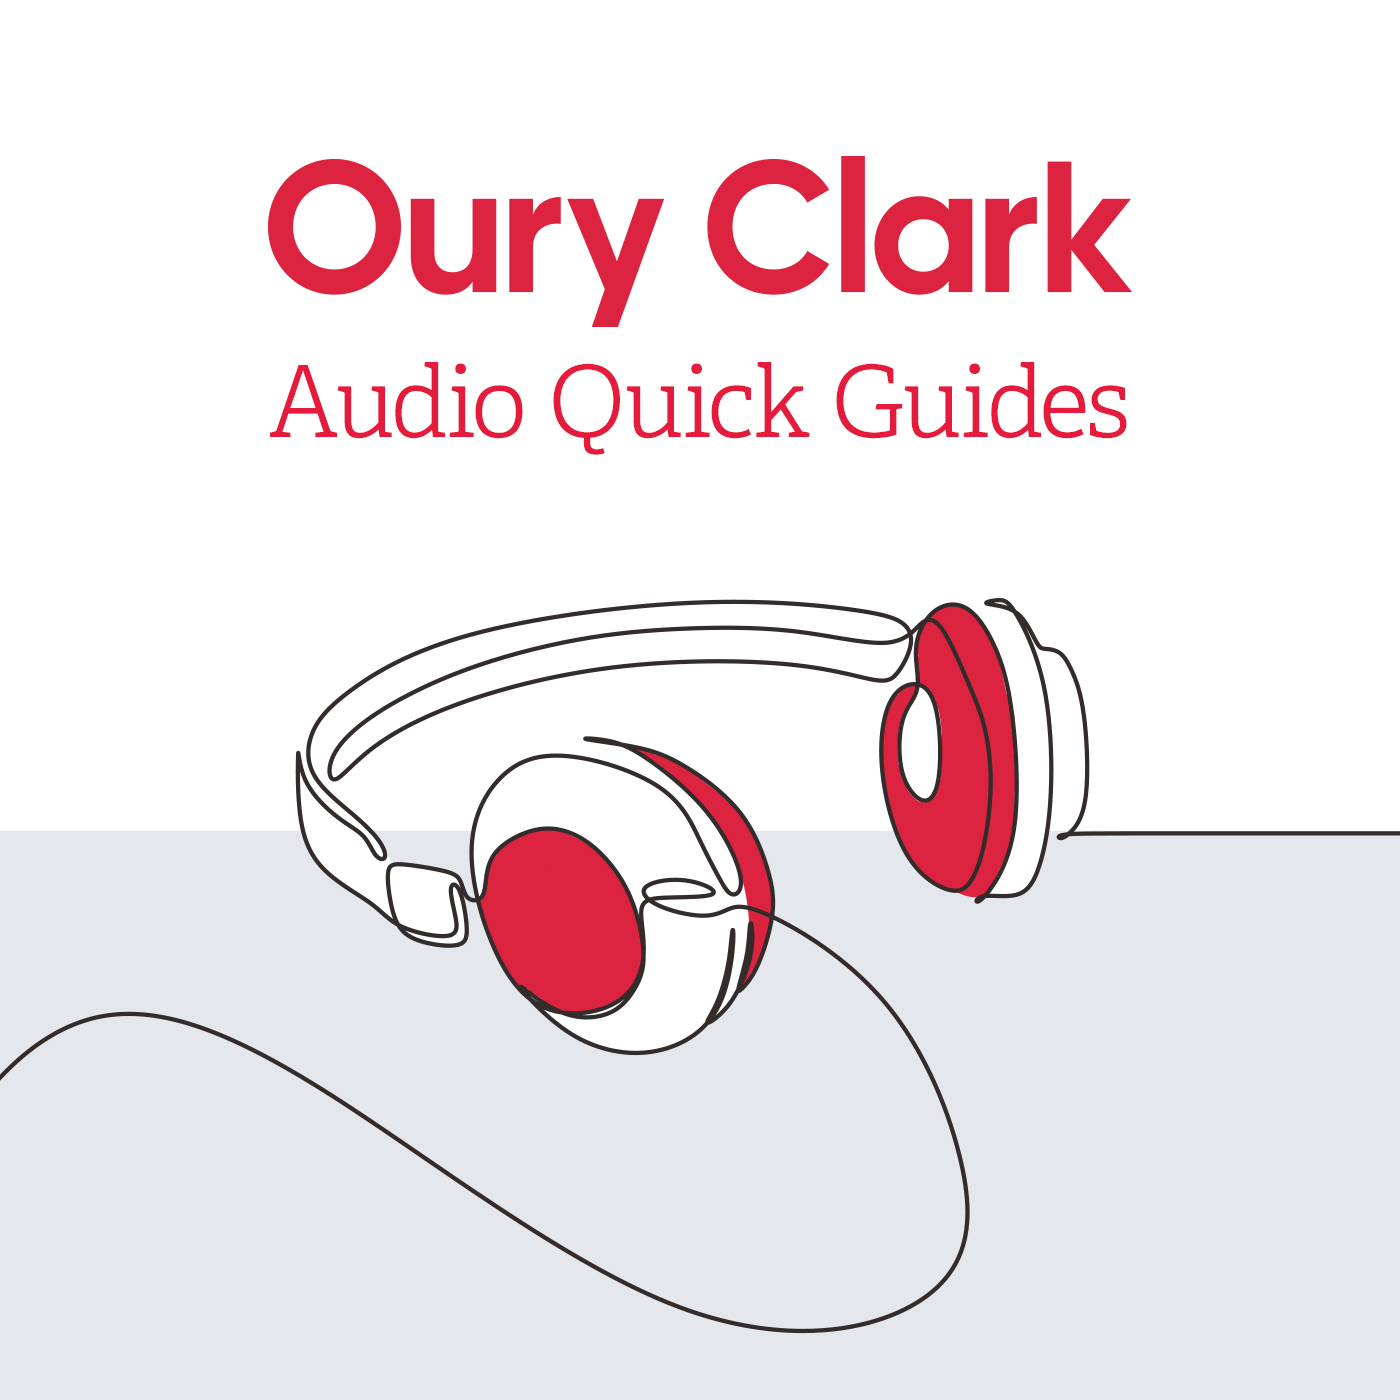 Artwork for Oury Clark Audio Quick Guides